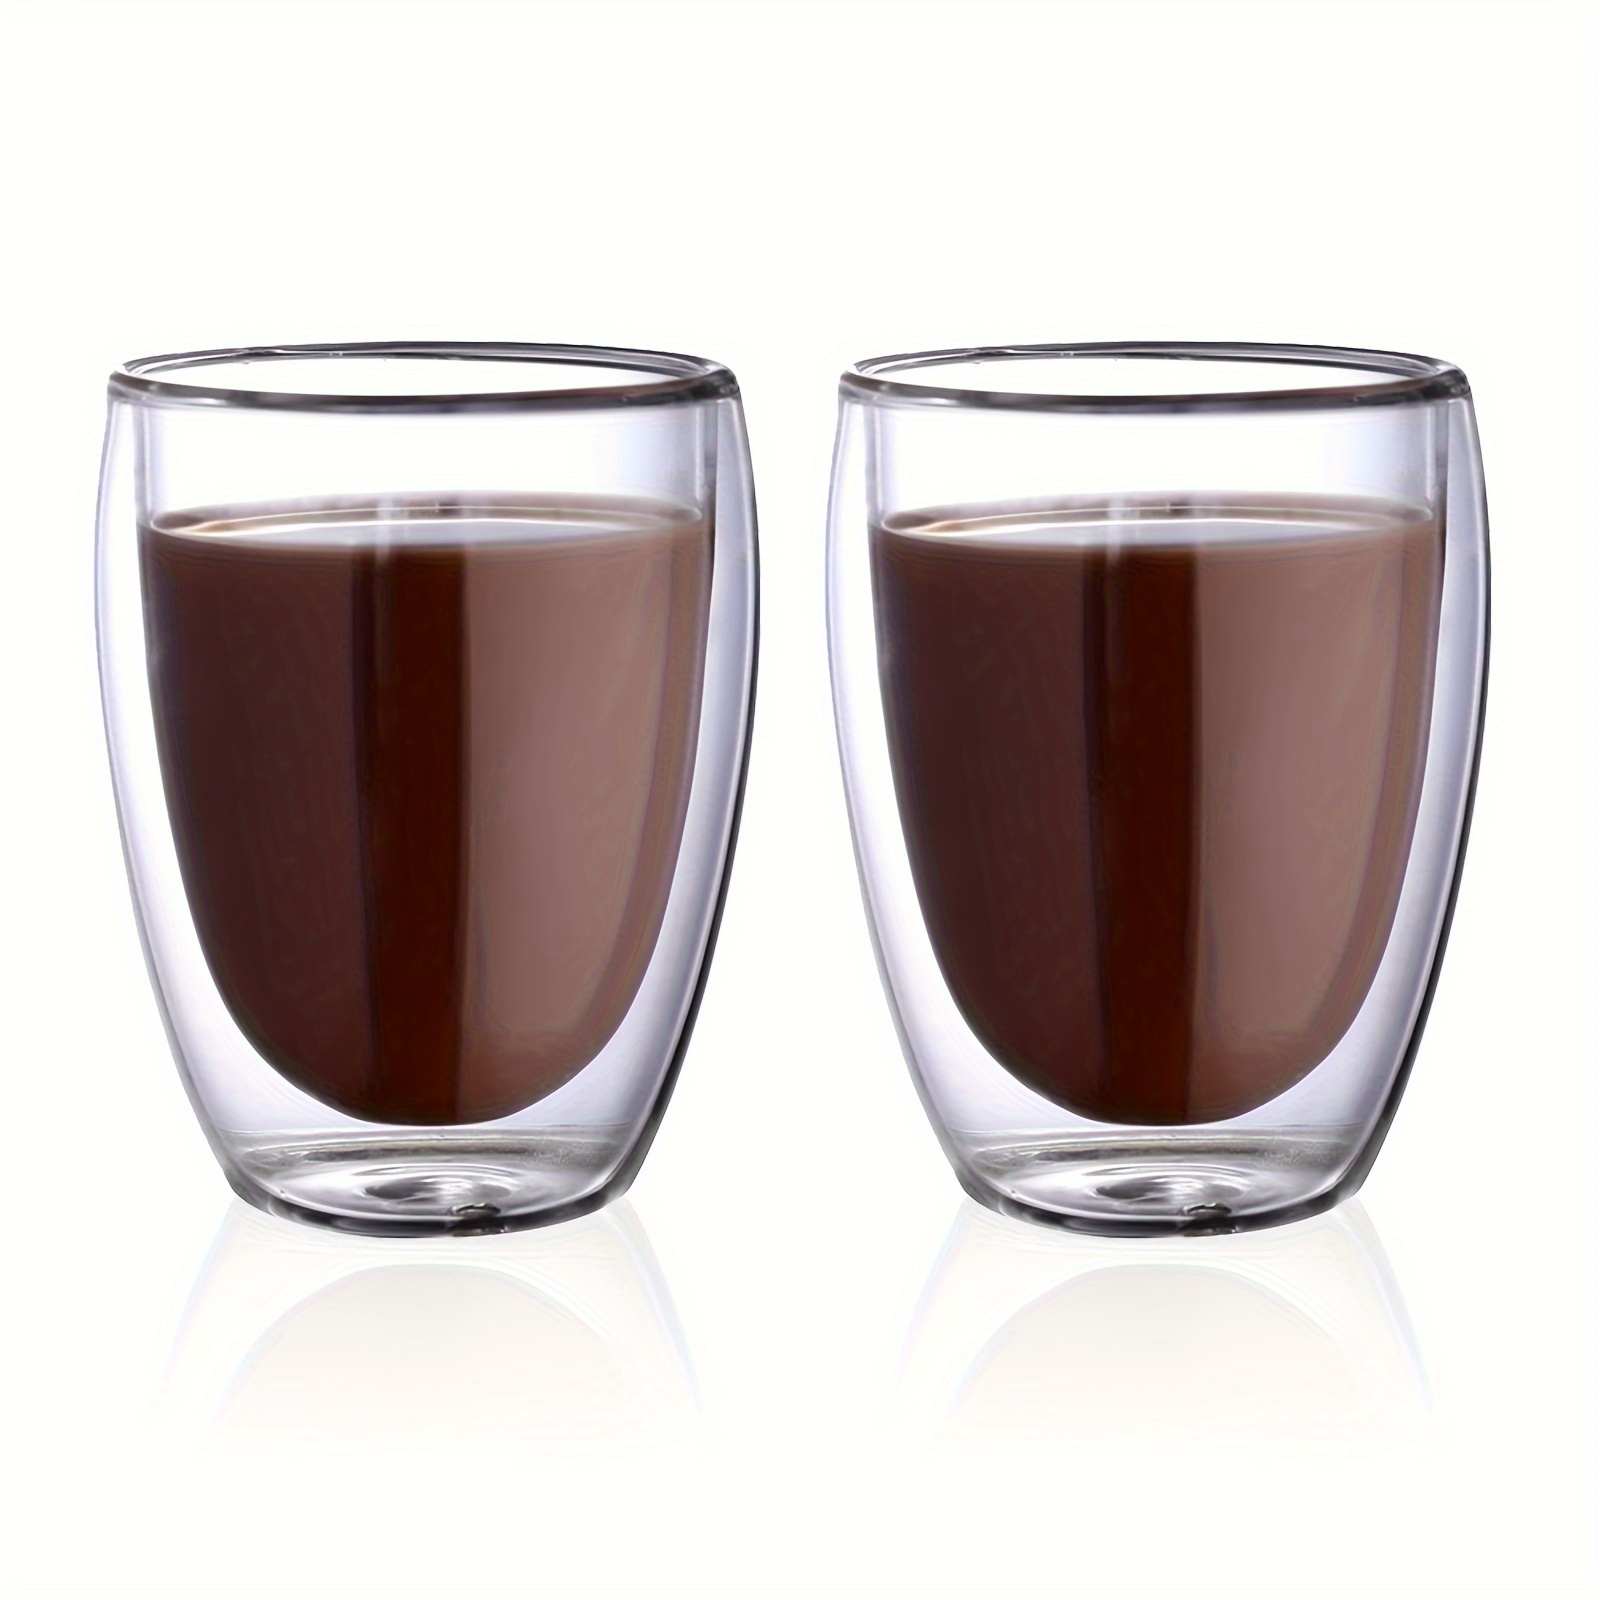 

2pcs, Double-walled Glass Cups, 350ml Coffee Glasses Mugs, Handleless Glass Coffee Mugs, Transparent For Hot Cold Drink Cappuccino, Latte, Iced Coffee, Tea